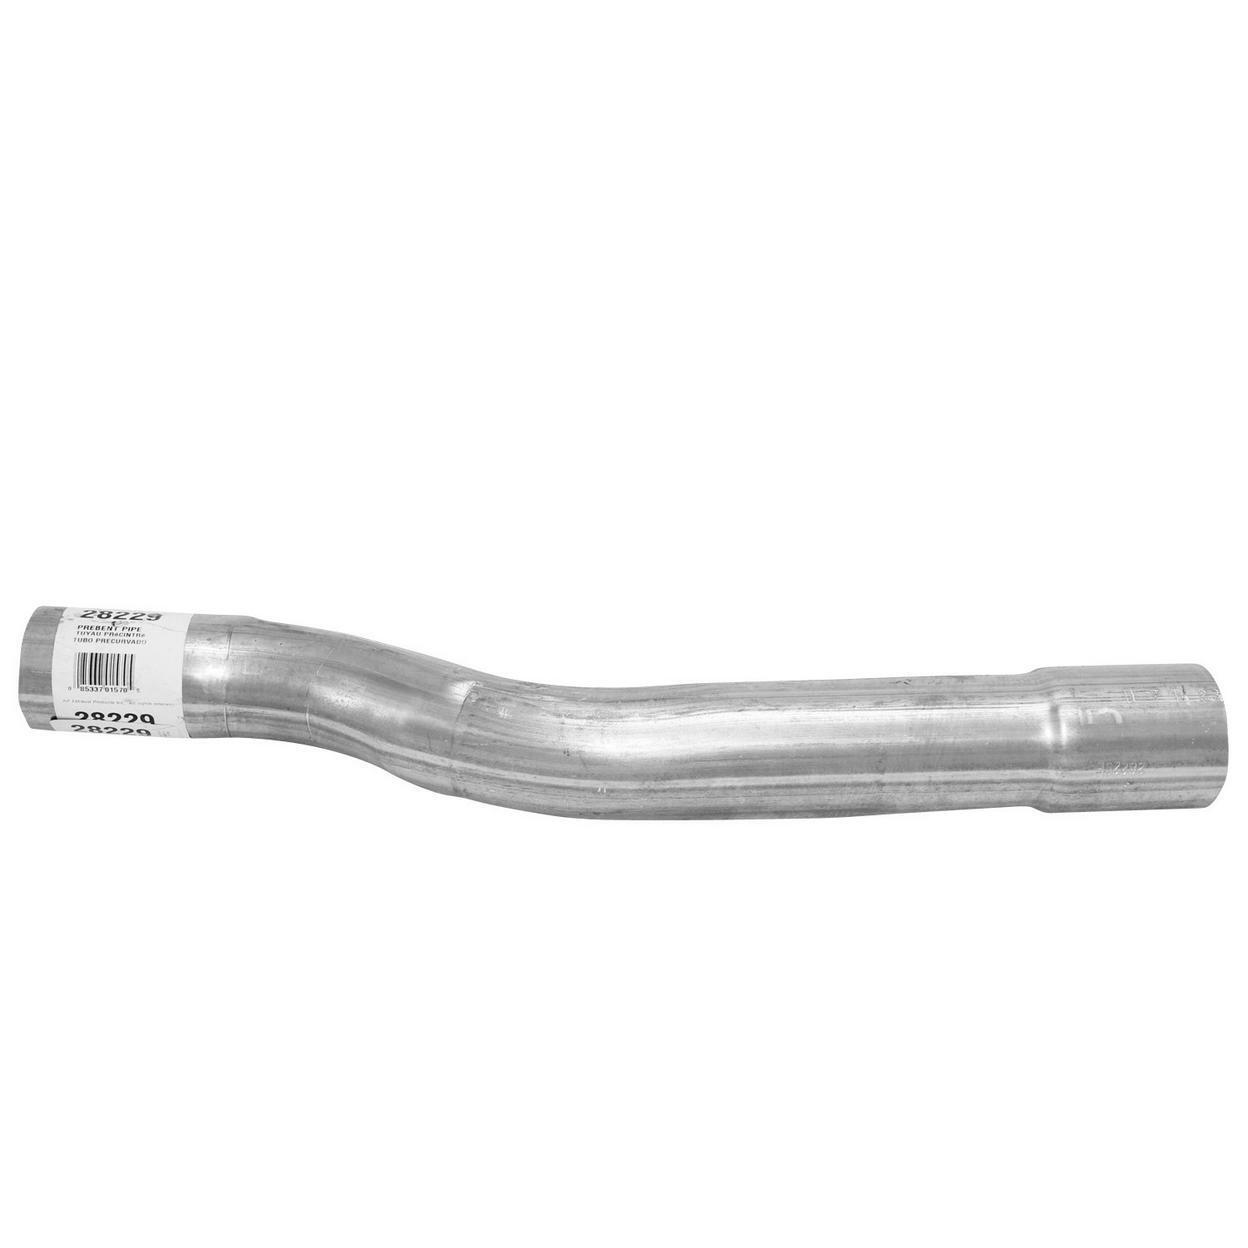 28229-AW Exhaust Pipe Fits 1992-1995 Volvo 940